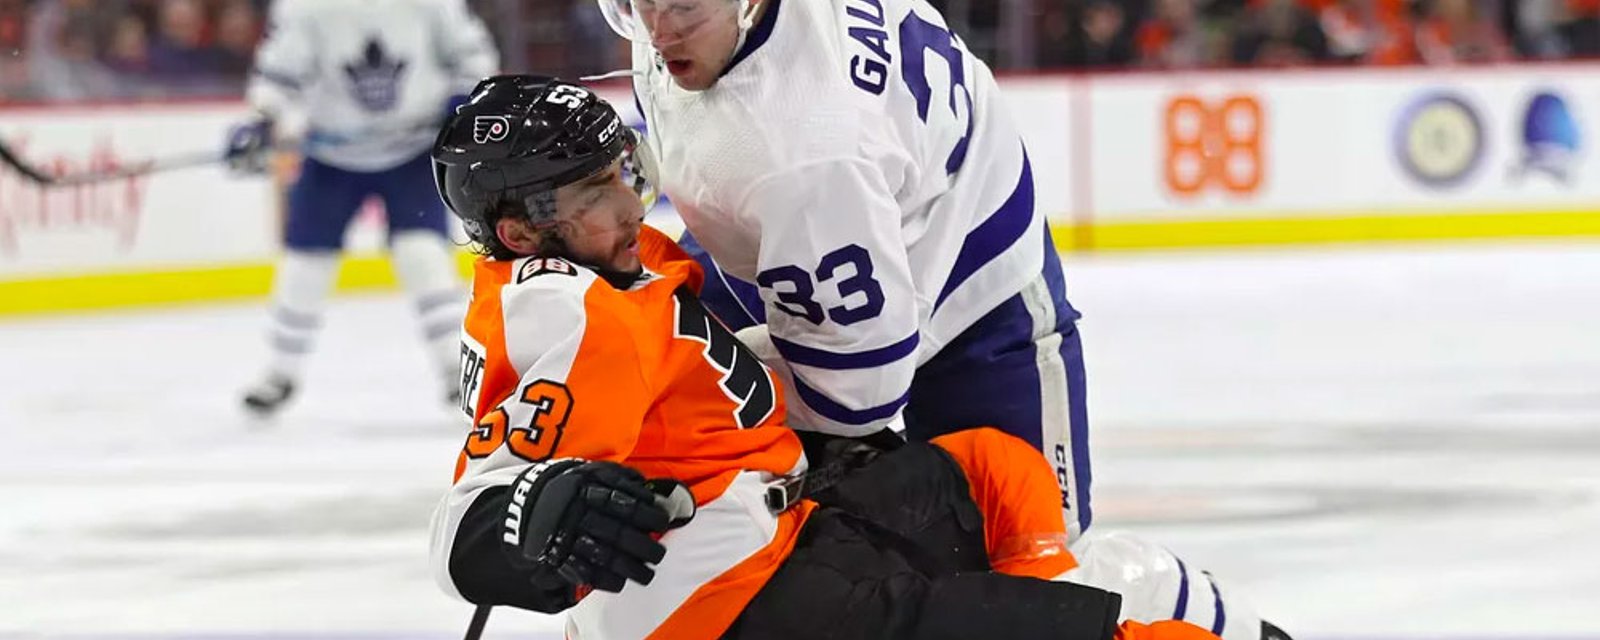 Potential huge trade shaping up between Leafs and Flyers? 